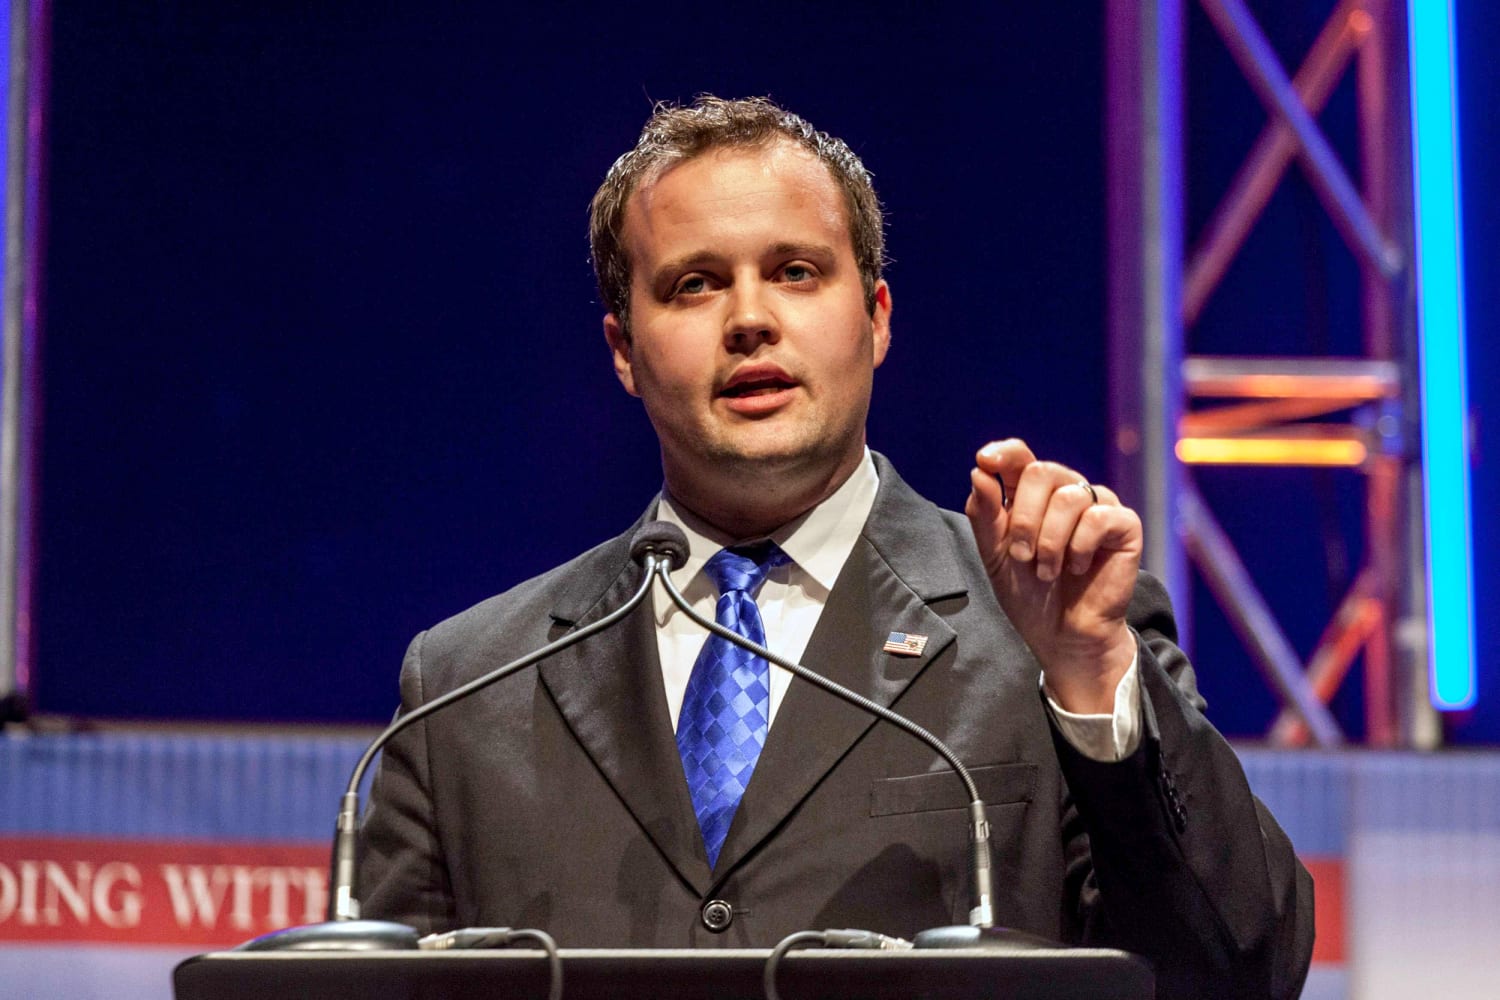 Josh Duggar granted release but not allowed to return home in alleged child sex abuse image case